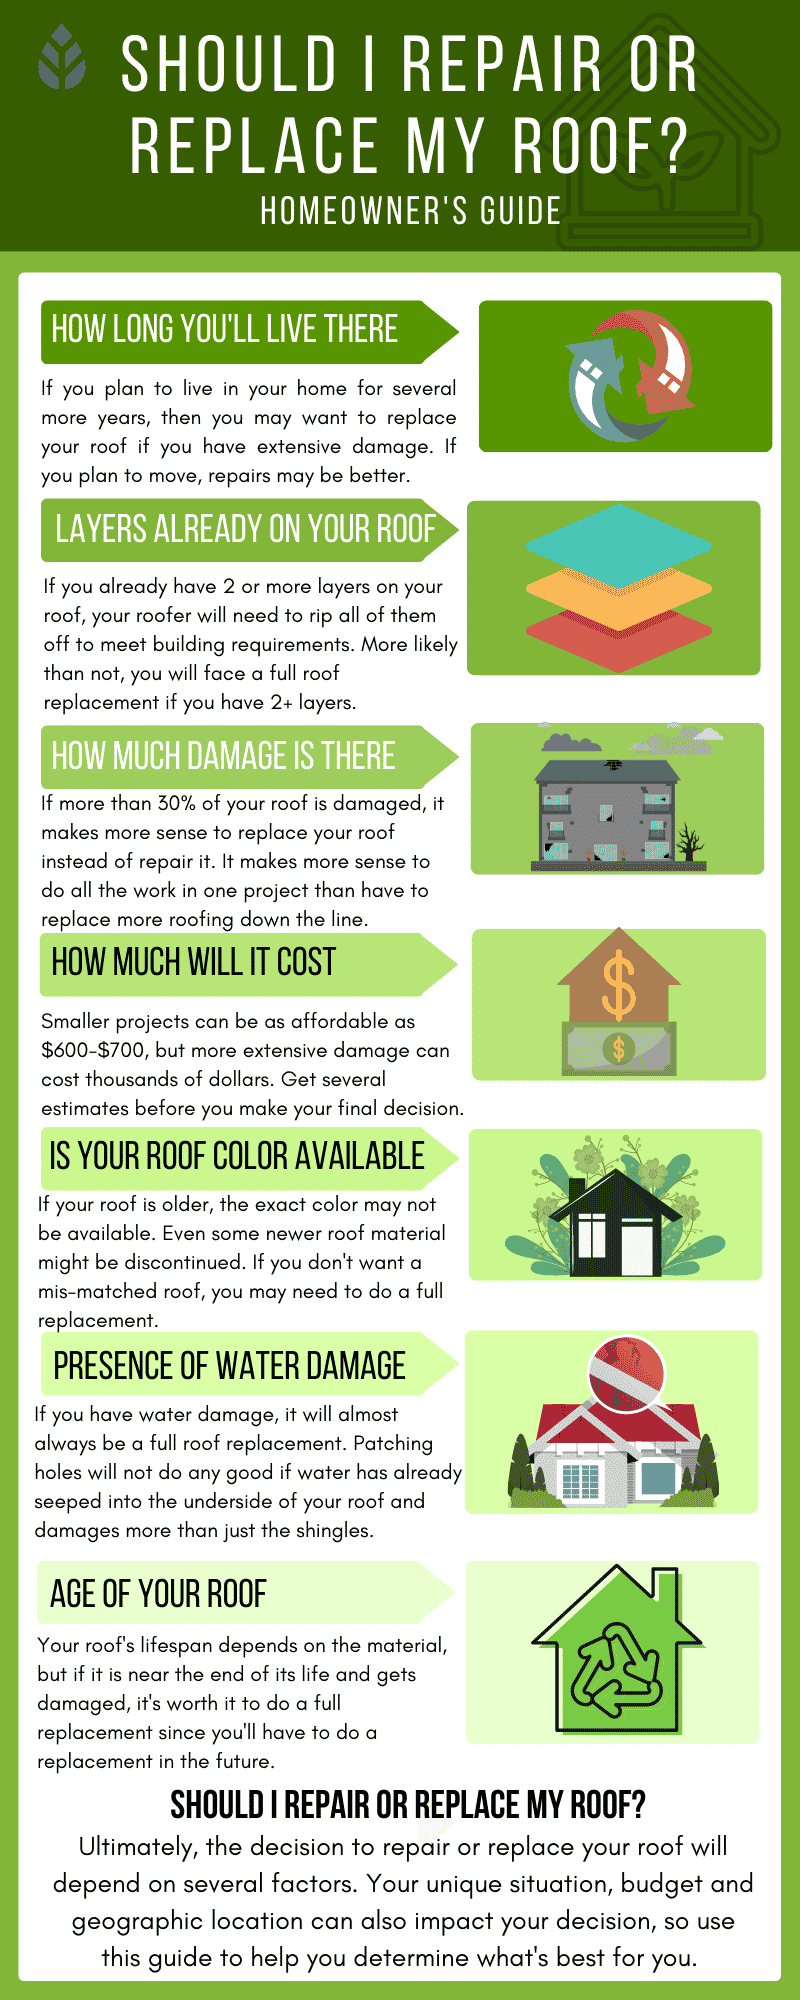 Should I Repair or Replace My Roof infographic